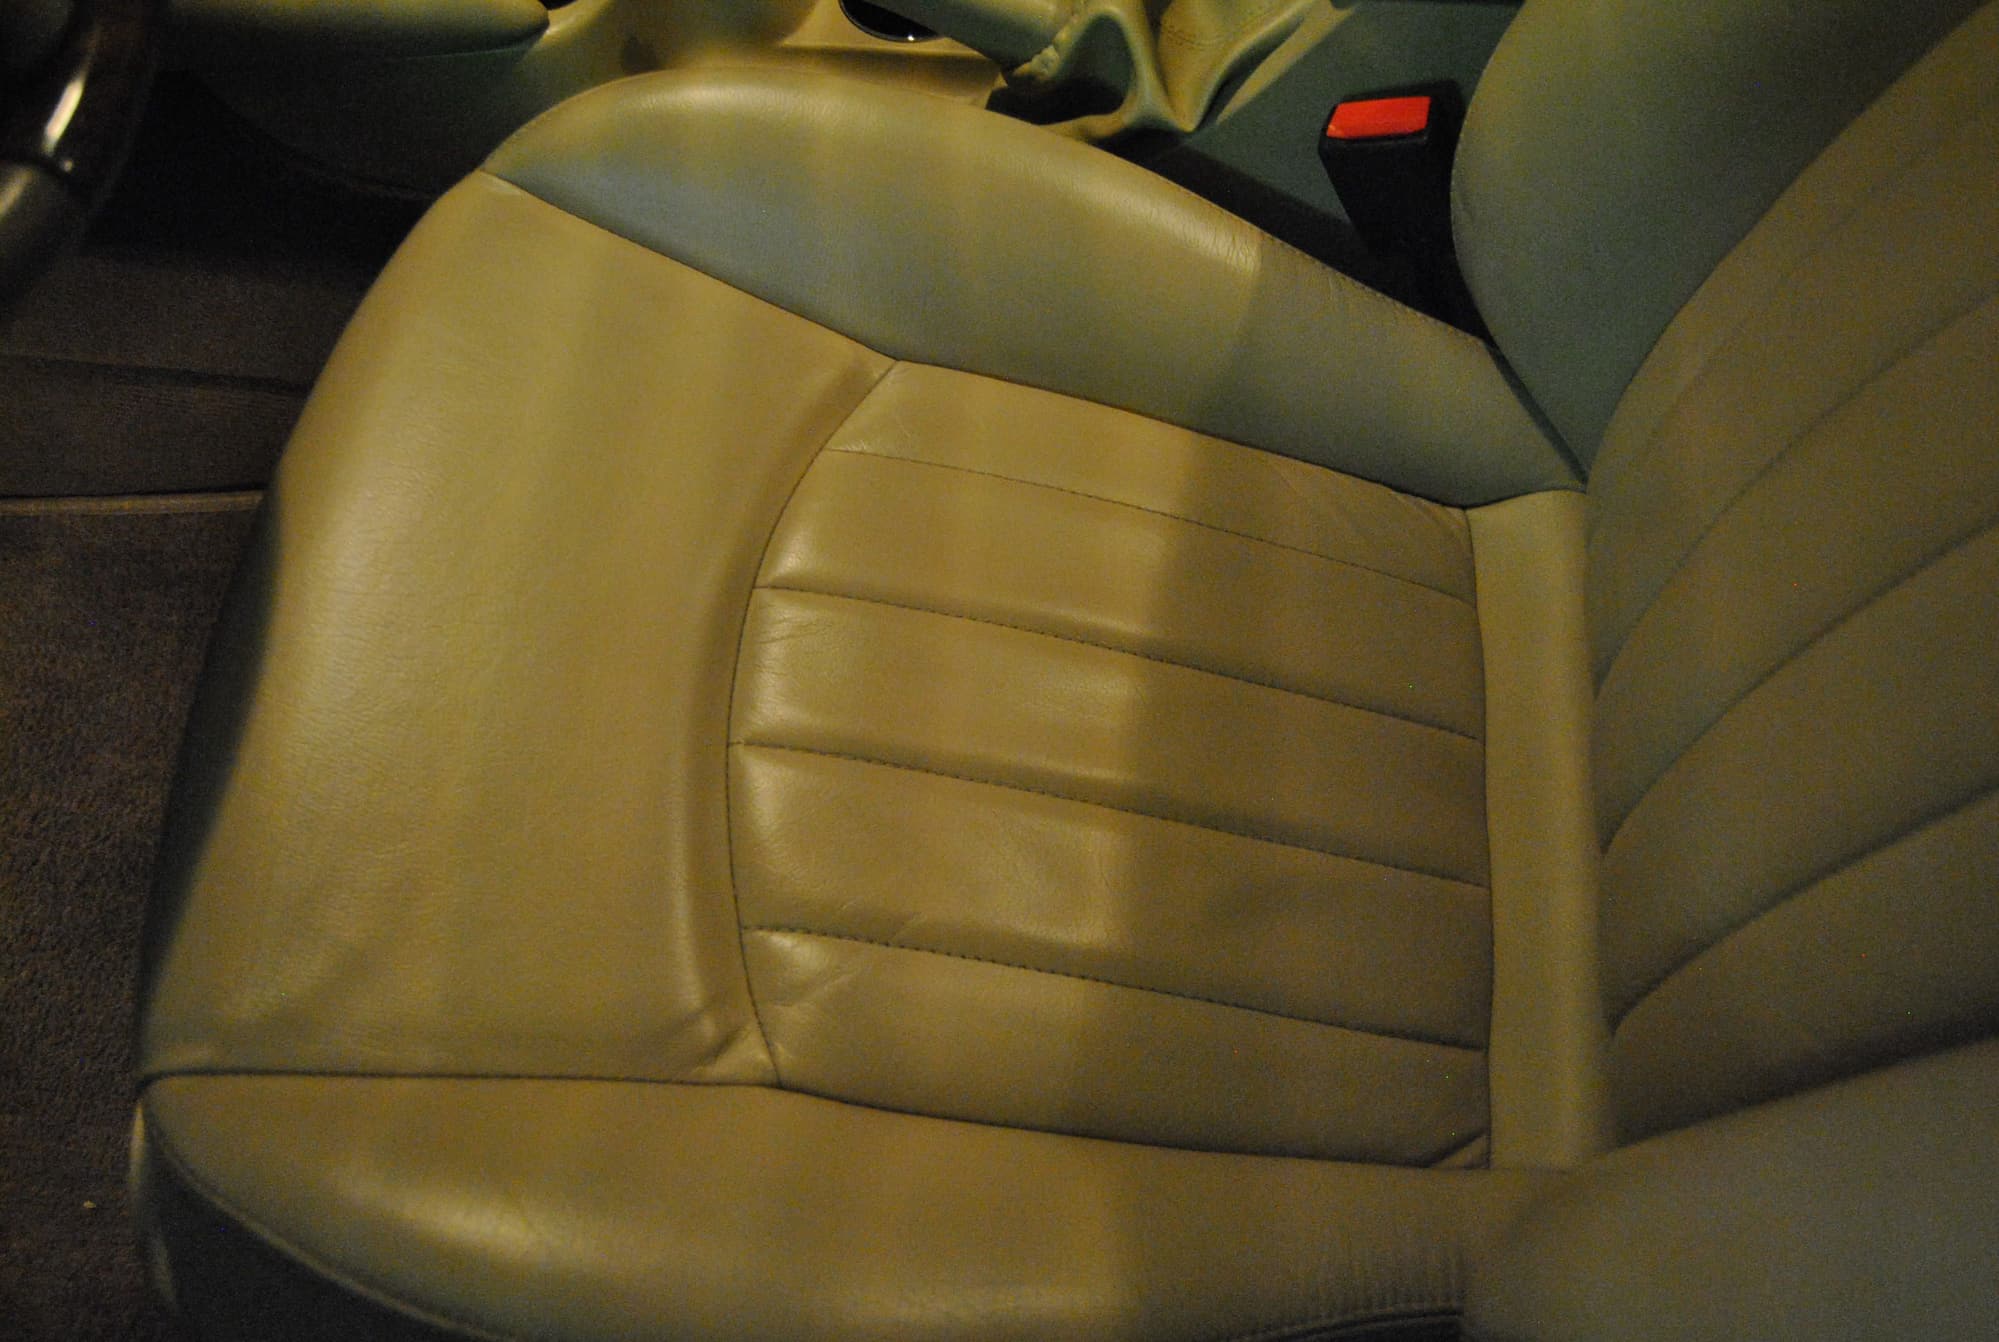 Meguiar's - Whether your leather interior is brand-new, or more like a  finely aged baseball glove, there's no easier, more effective way to deep  clean and nourish. This one-two system in our